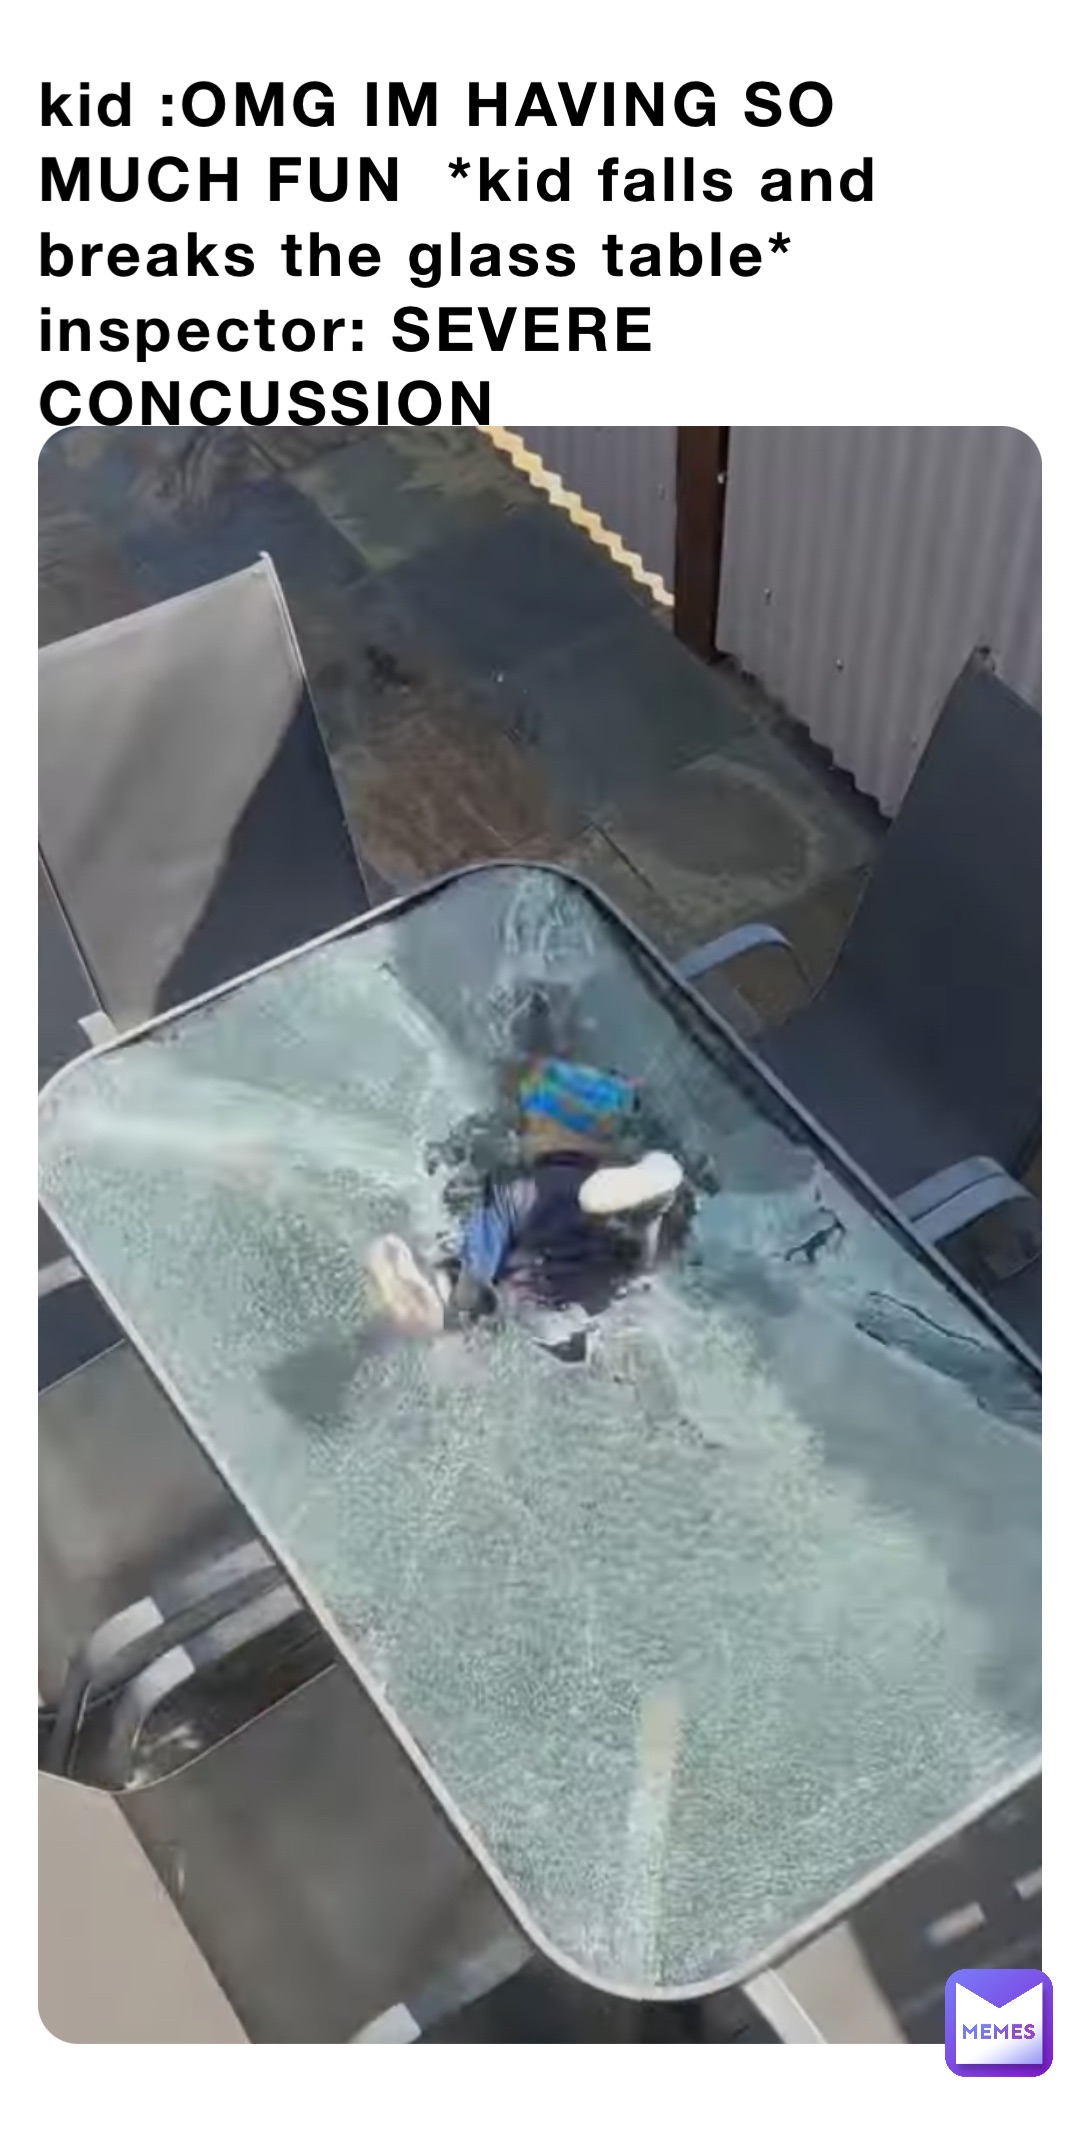 kid :OMG IM HAVING SO MUCH FUN  *kid falls and breaks the glass table* inspector: SEVERE CONCUSSION